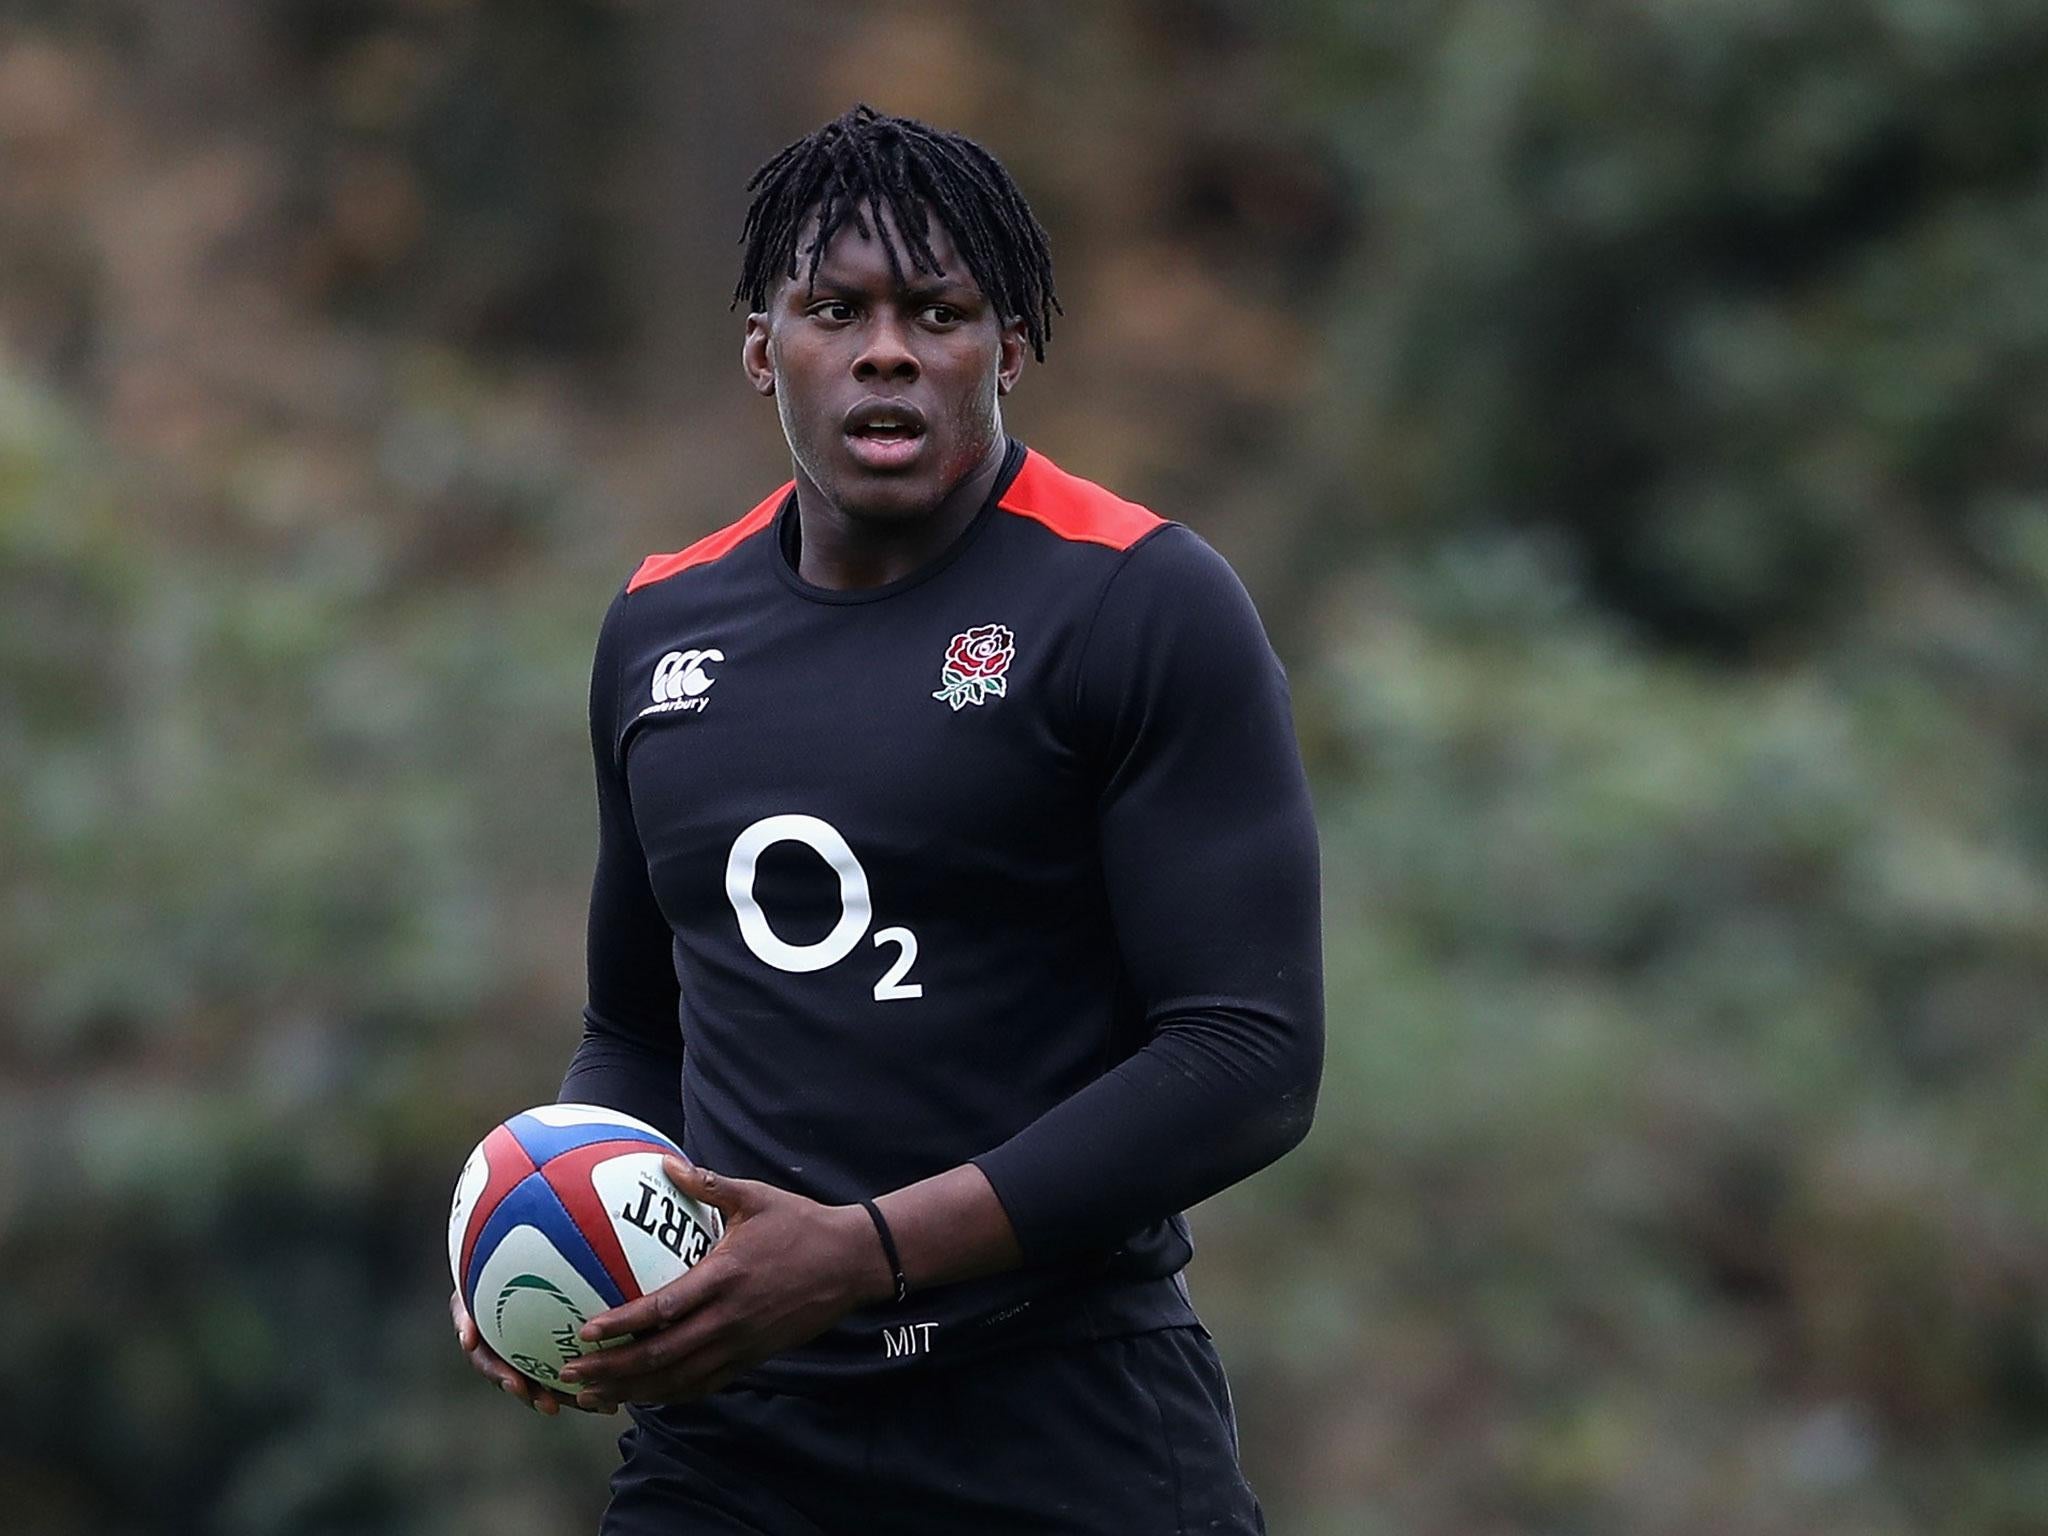 Maro Itoje was an injury doubt for England's Six Nations campaign